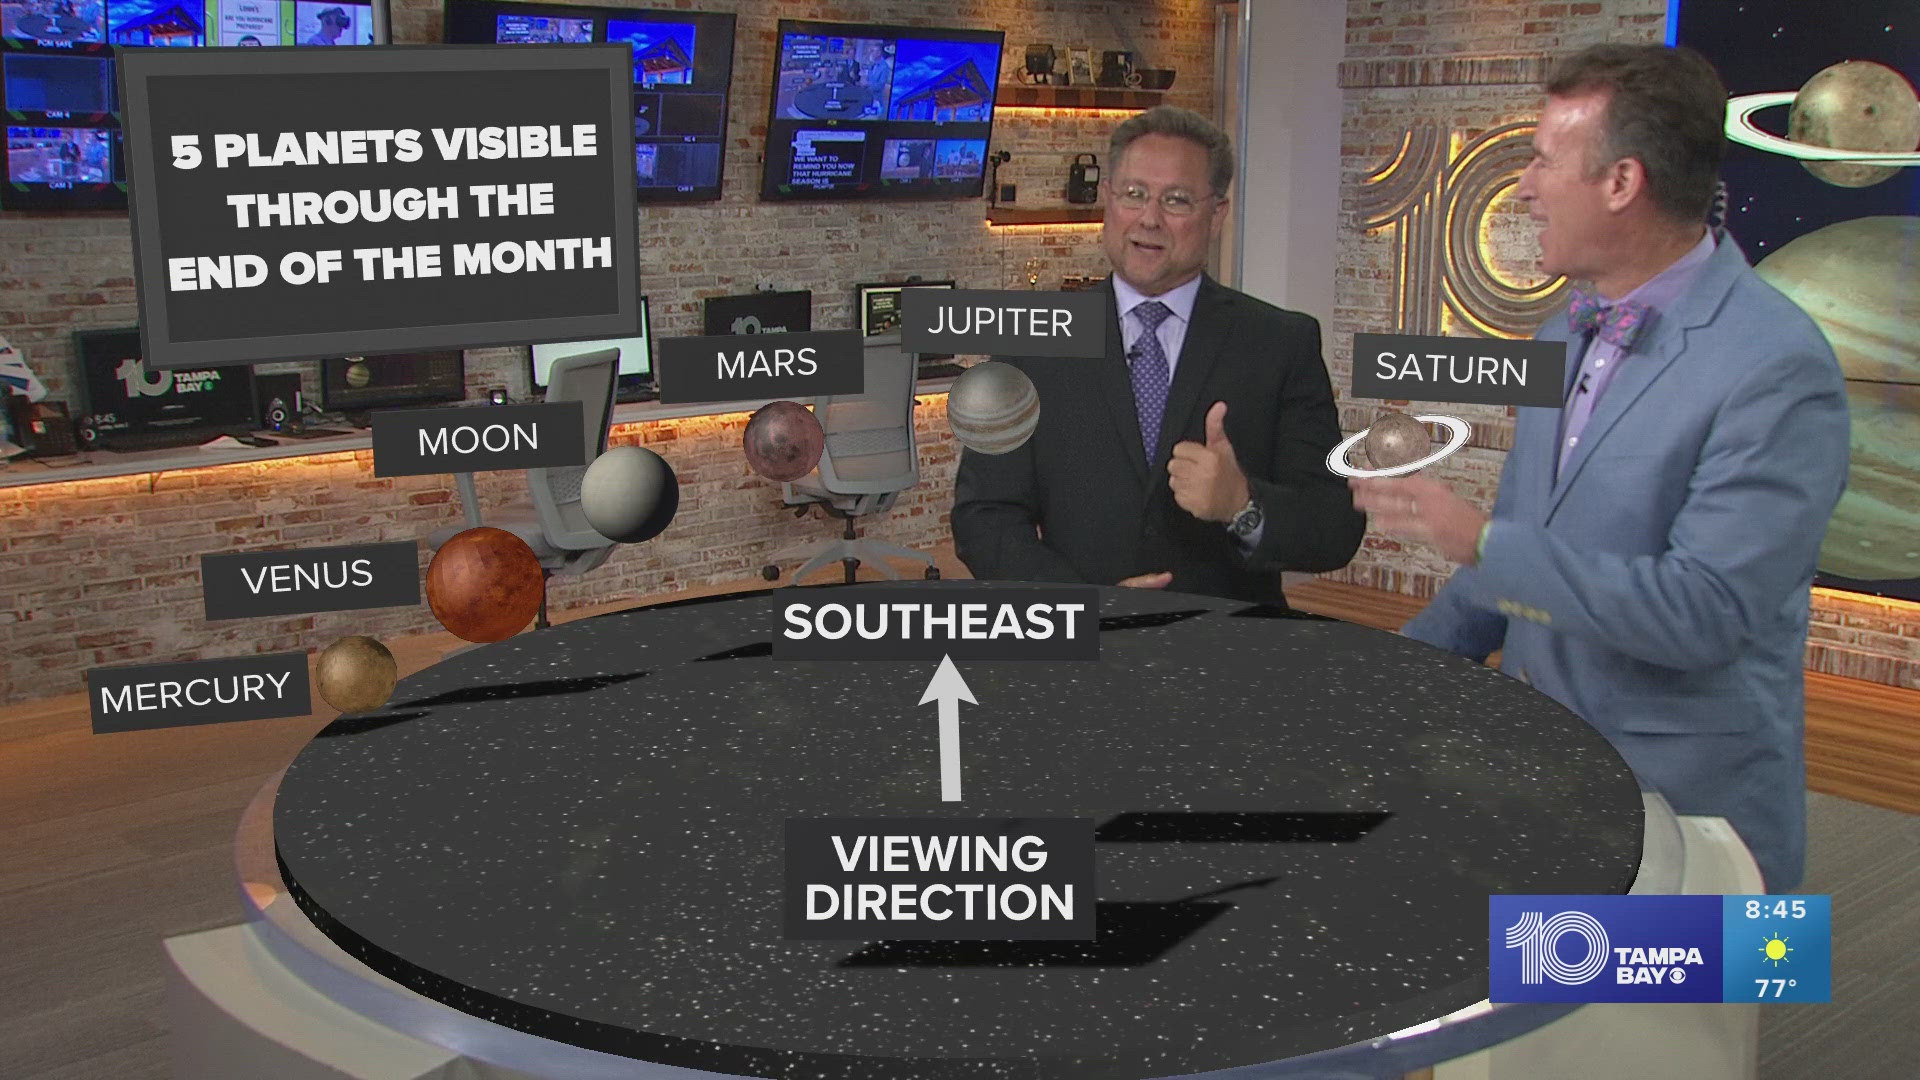 Look for a planetary parade in the sky and even some thunderstorms back in the forecast!